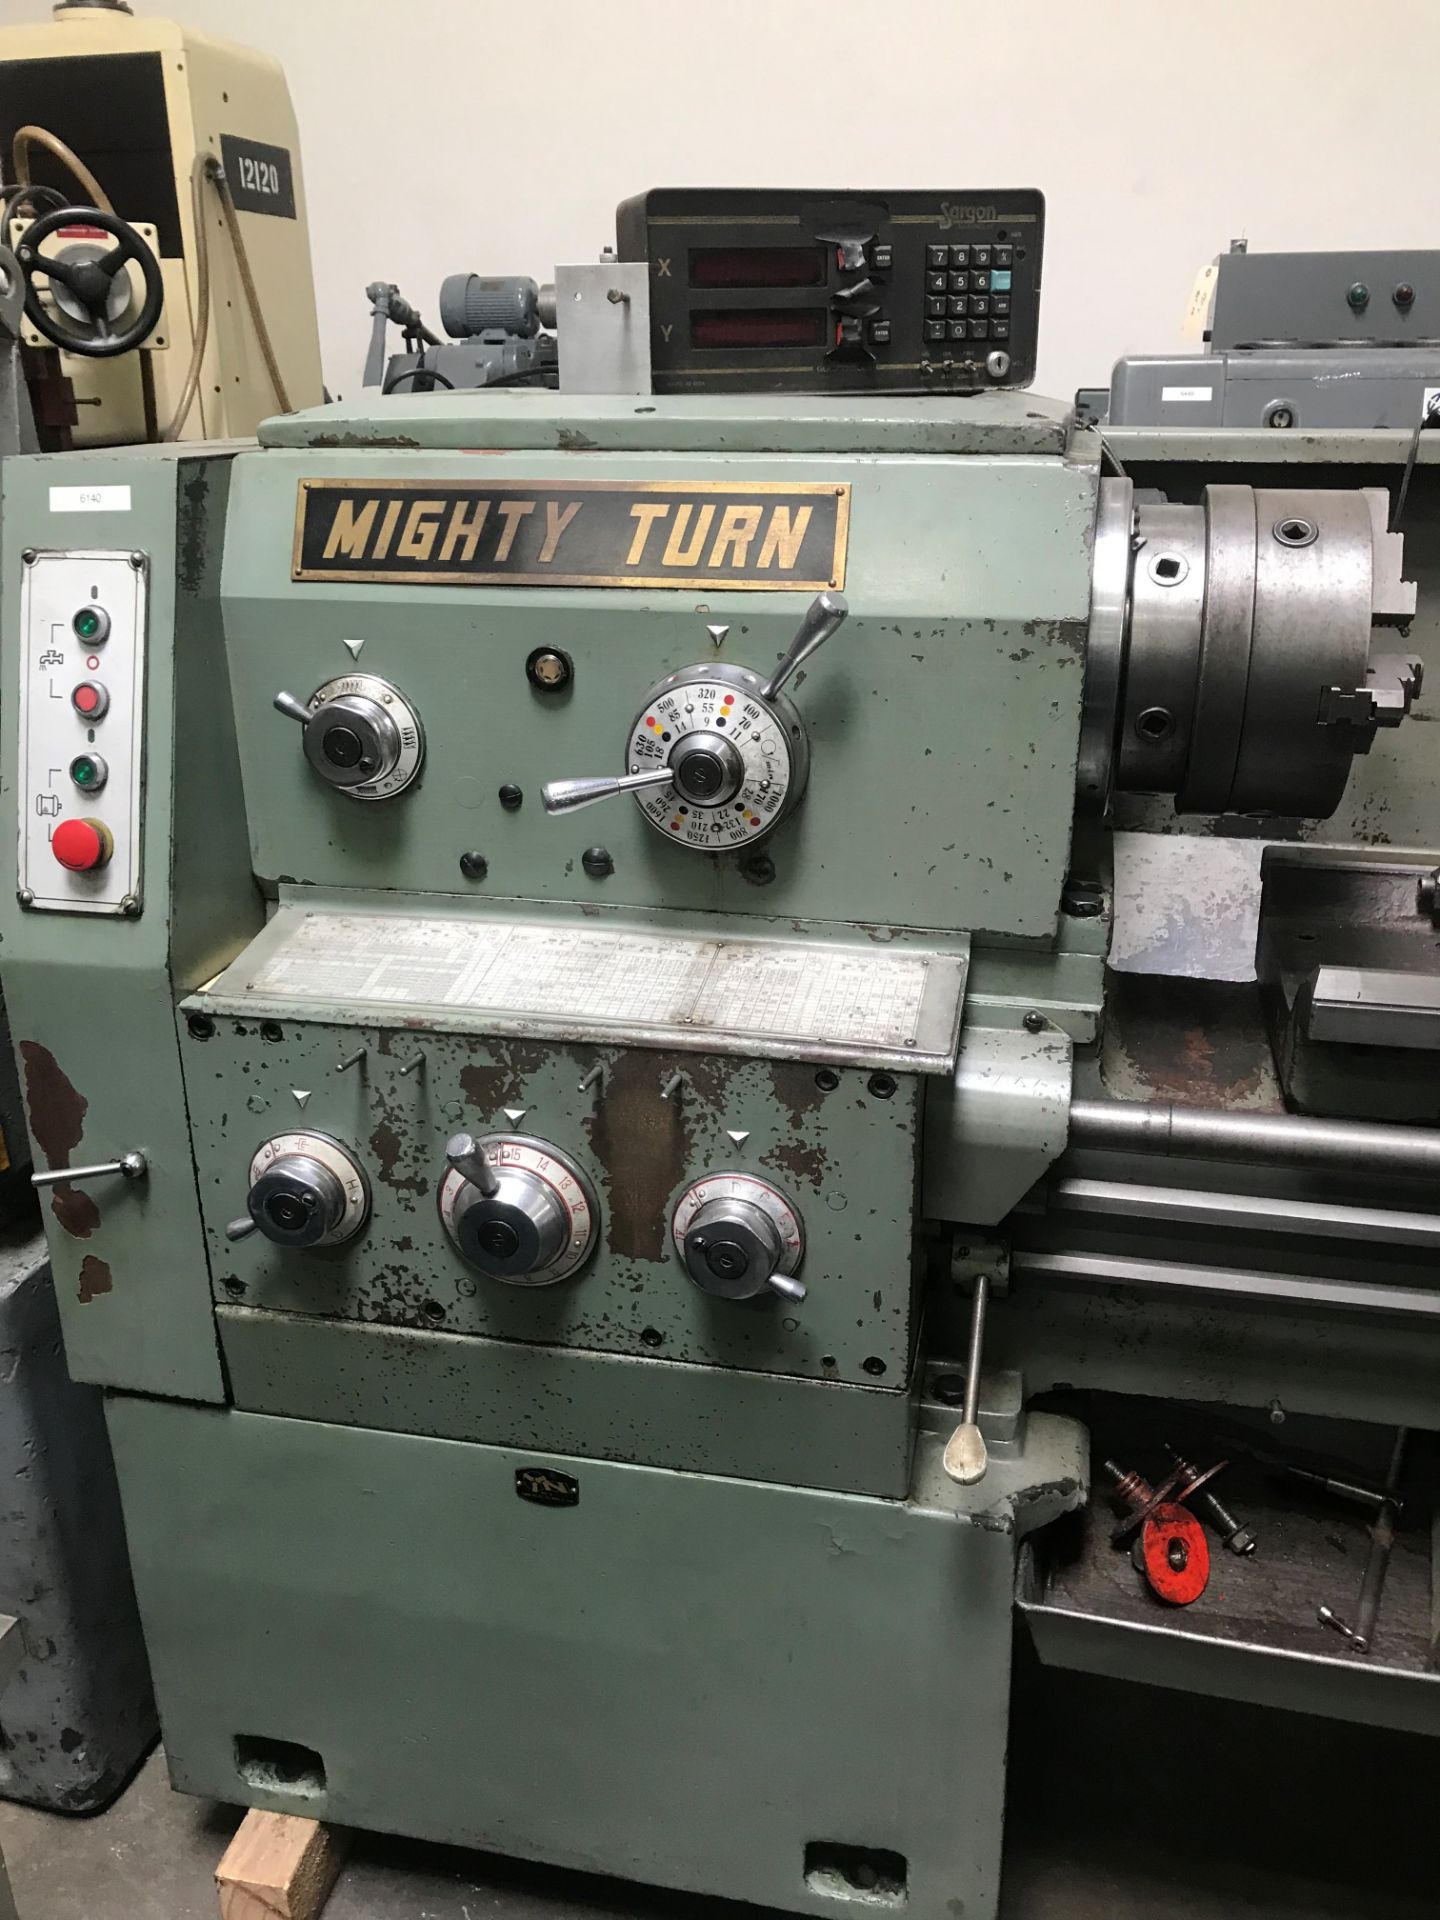 Mighty Turn ML-1840GL 18” x 40” Geared Head Gap Bed Lathe s/n 98081134 w/ Sargon DRO, SOLD AS IS - Image 2 of 10